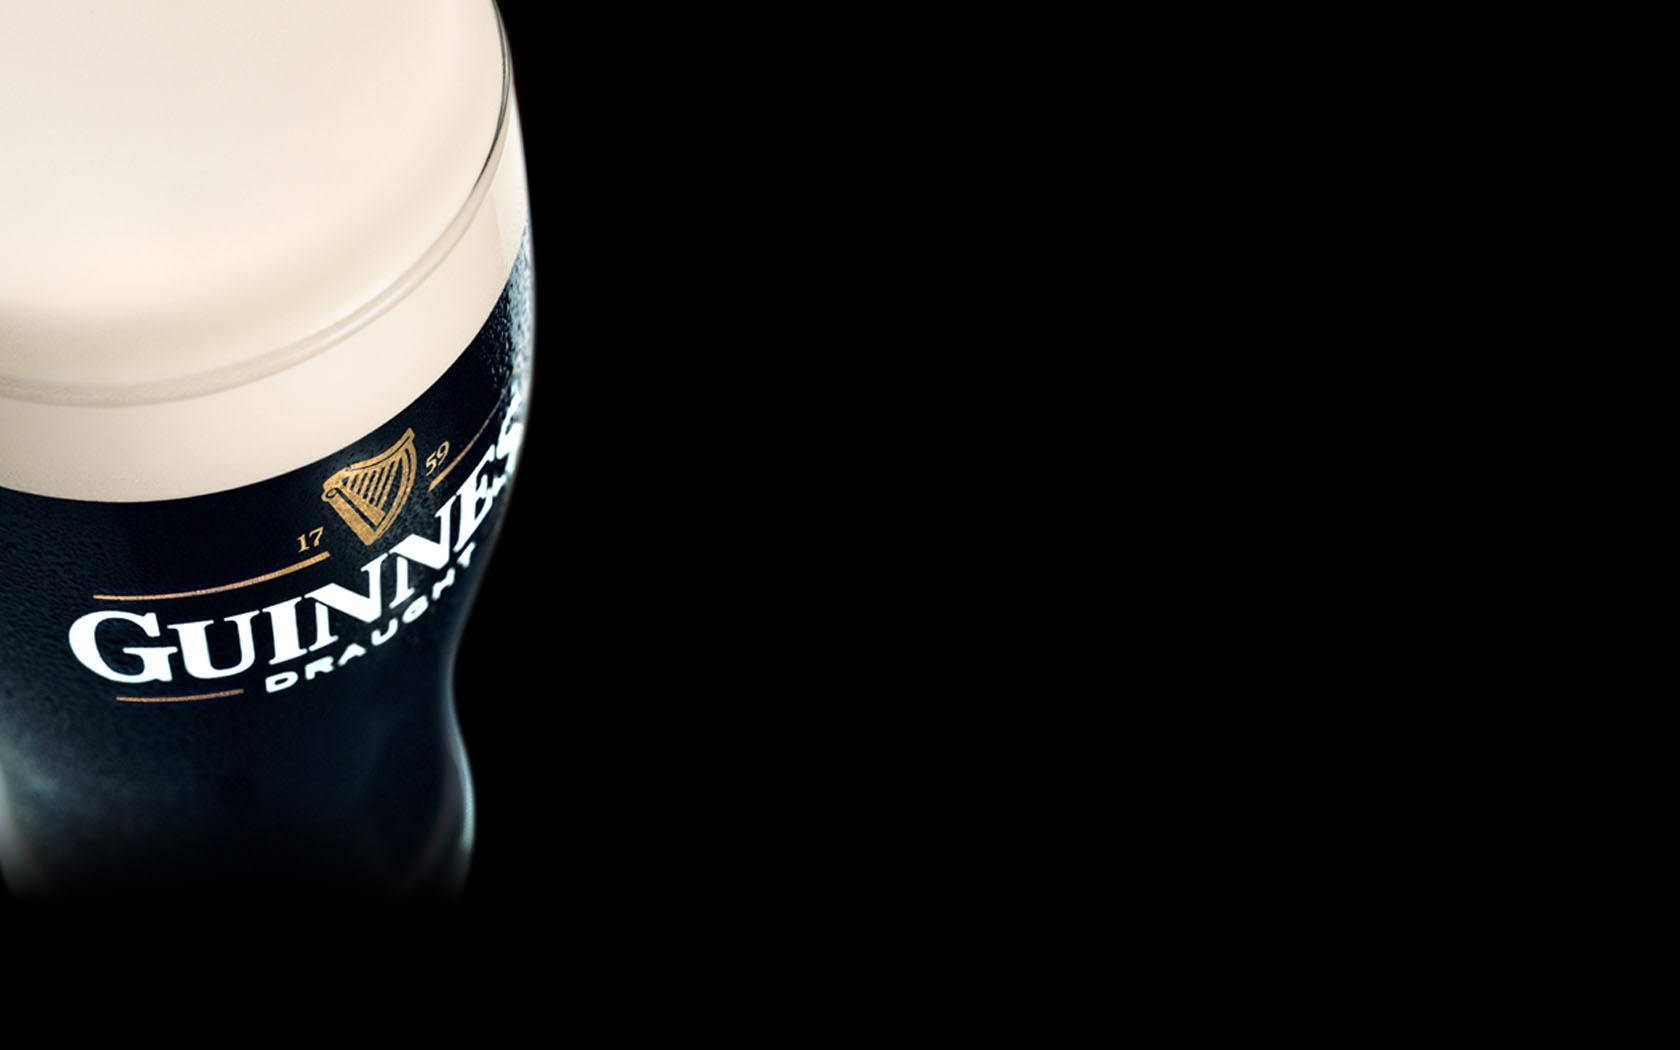 Top 999+ Guinness Wallpapers Full HD, 4K✅Free to Use